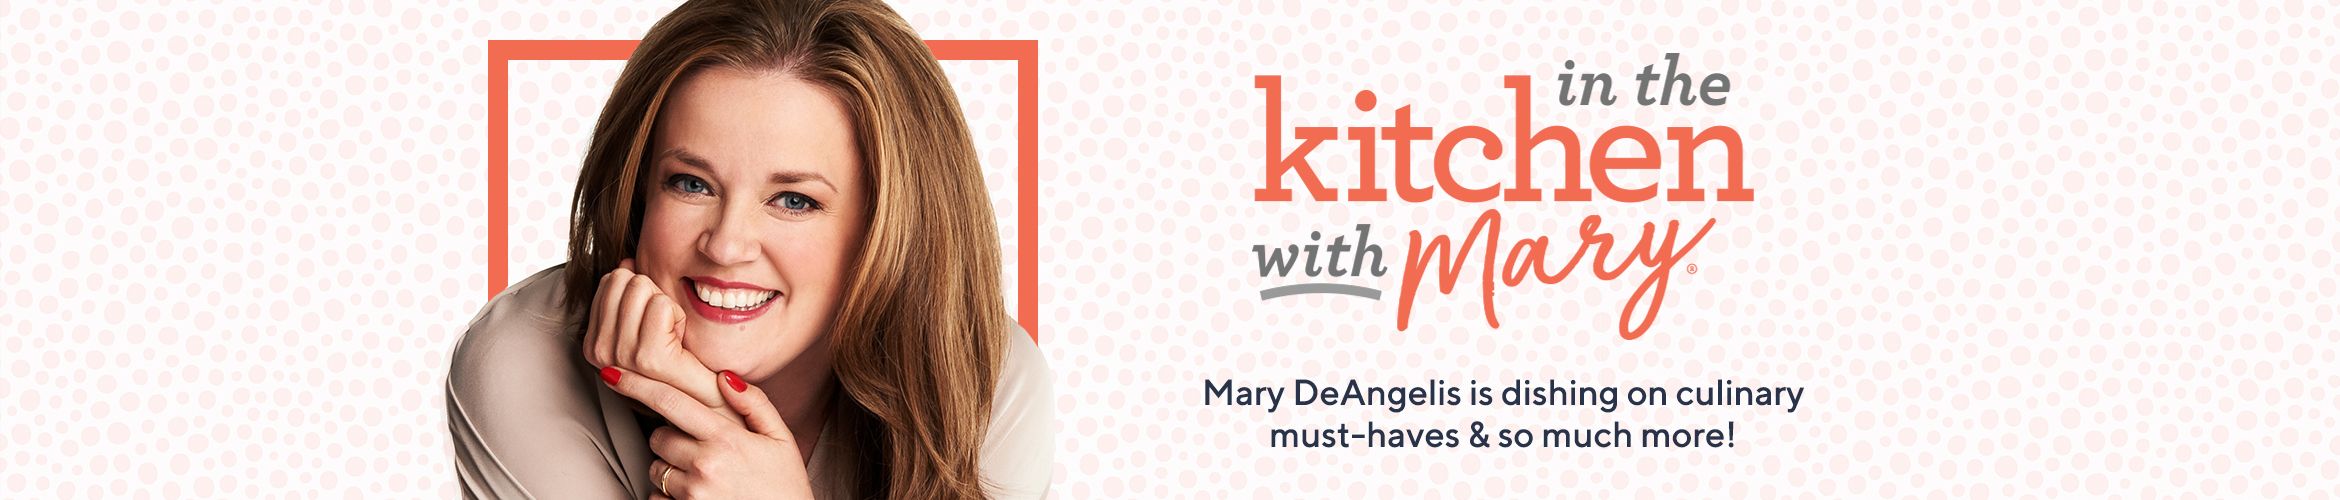 In the Kitchen with Mary Mary DeAngelis is dishing on culinary must-haves & so much more!